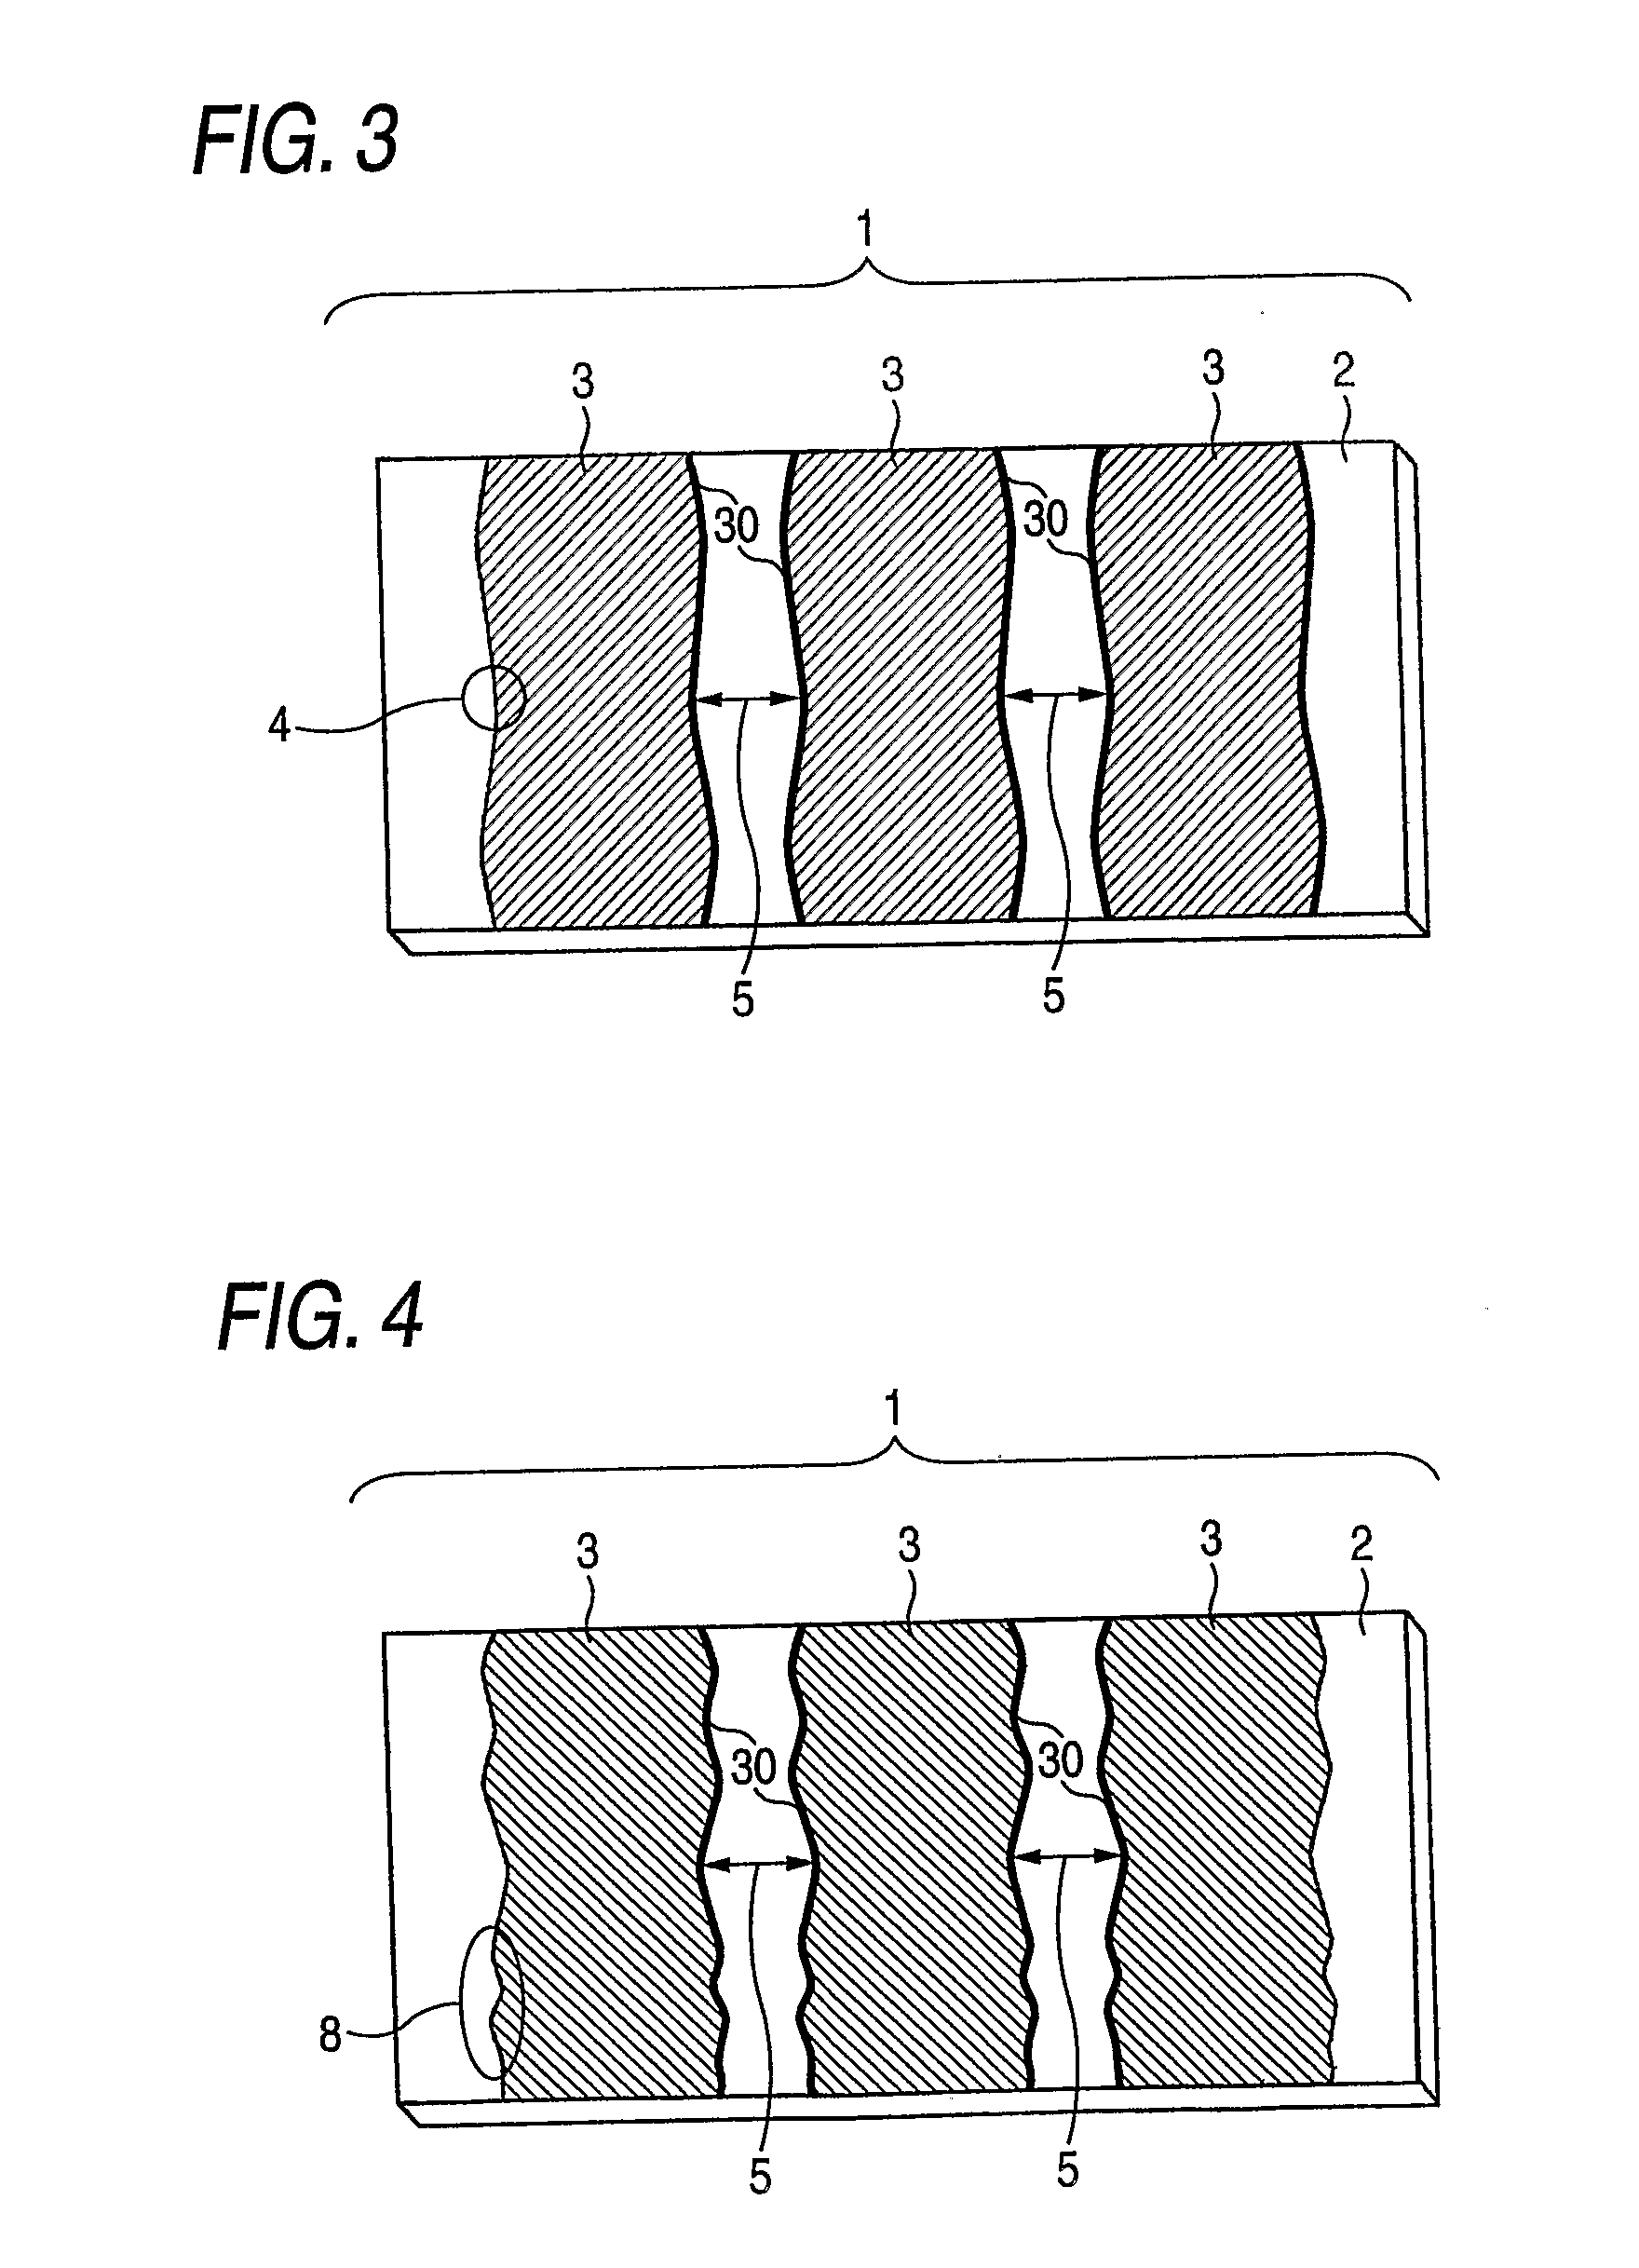 Multi-Layer Capacitor and Mold Capacitor